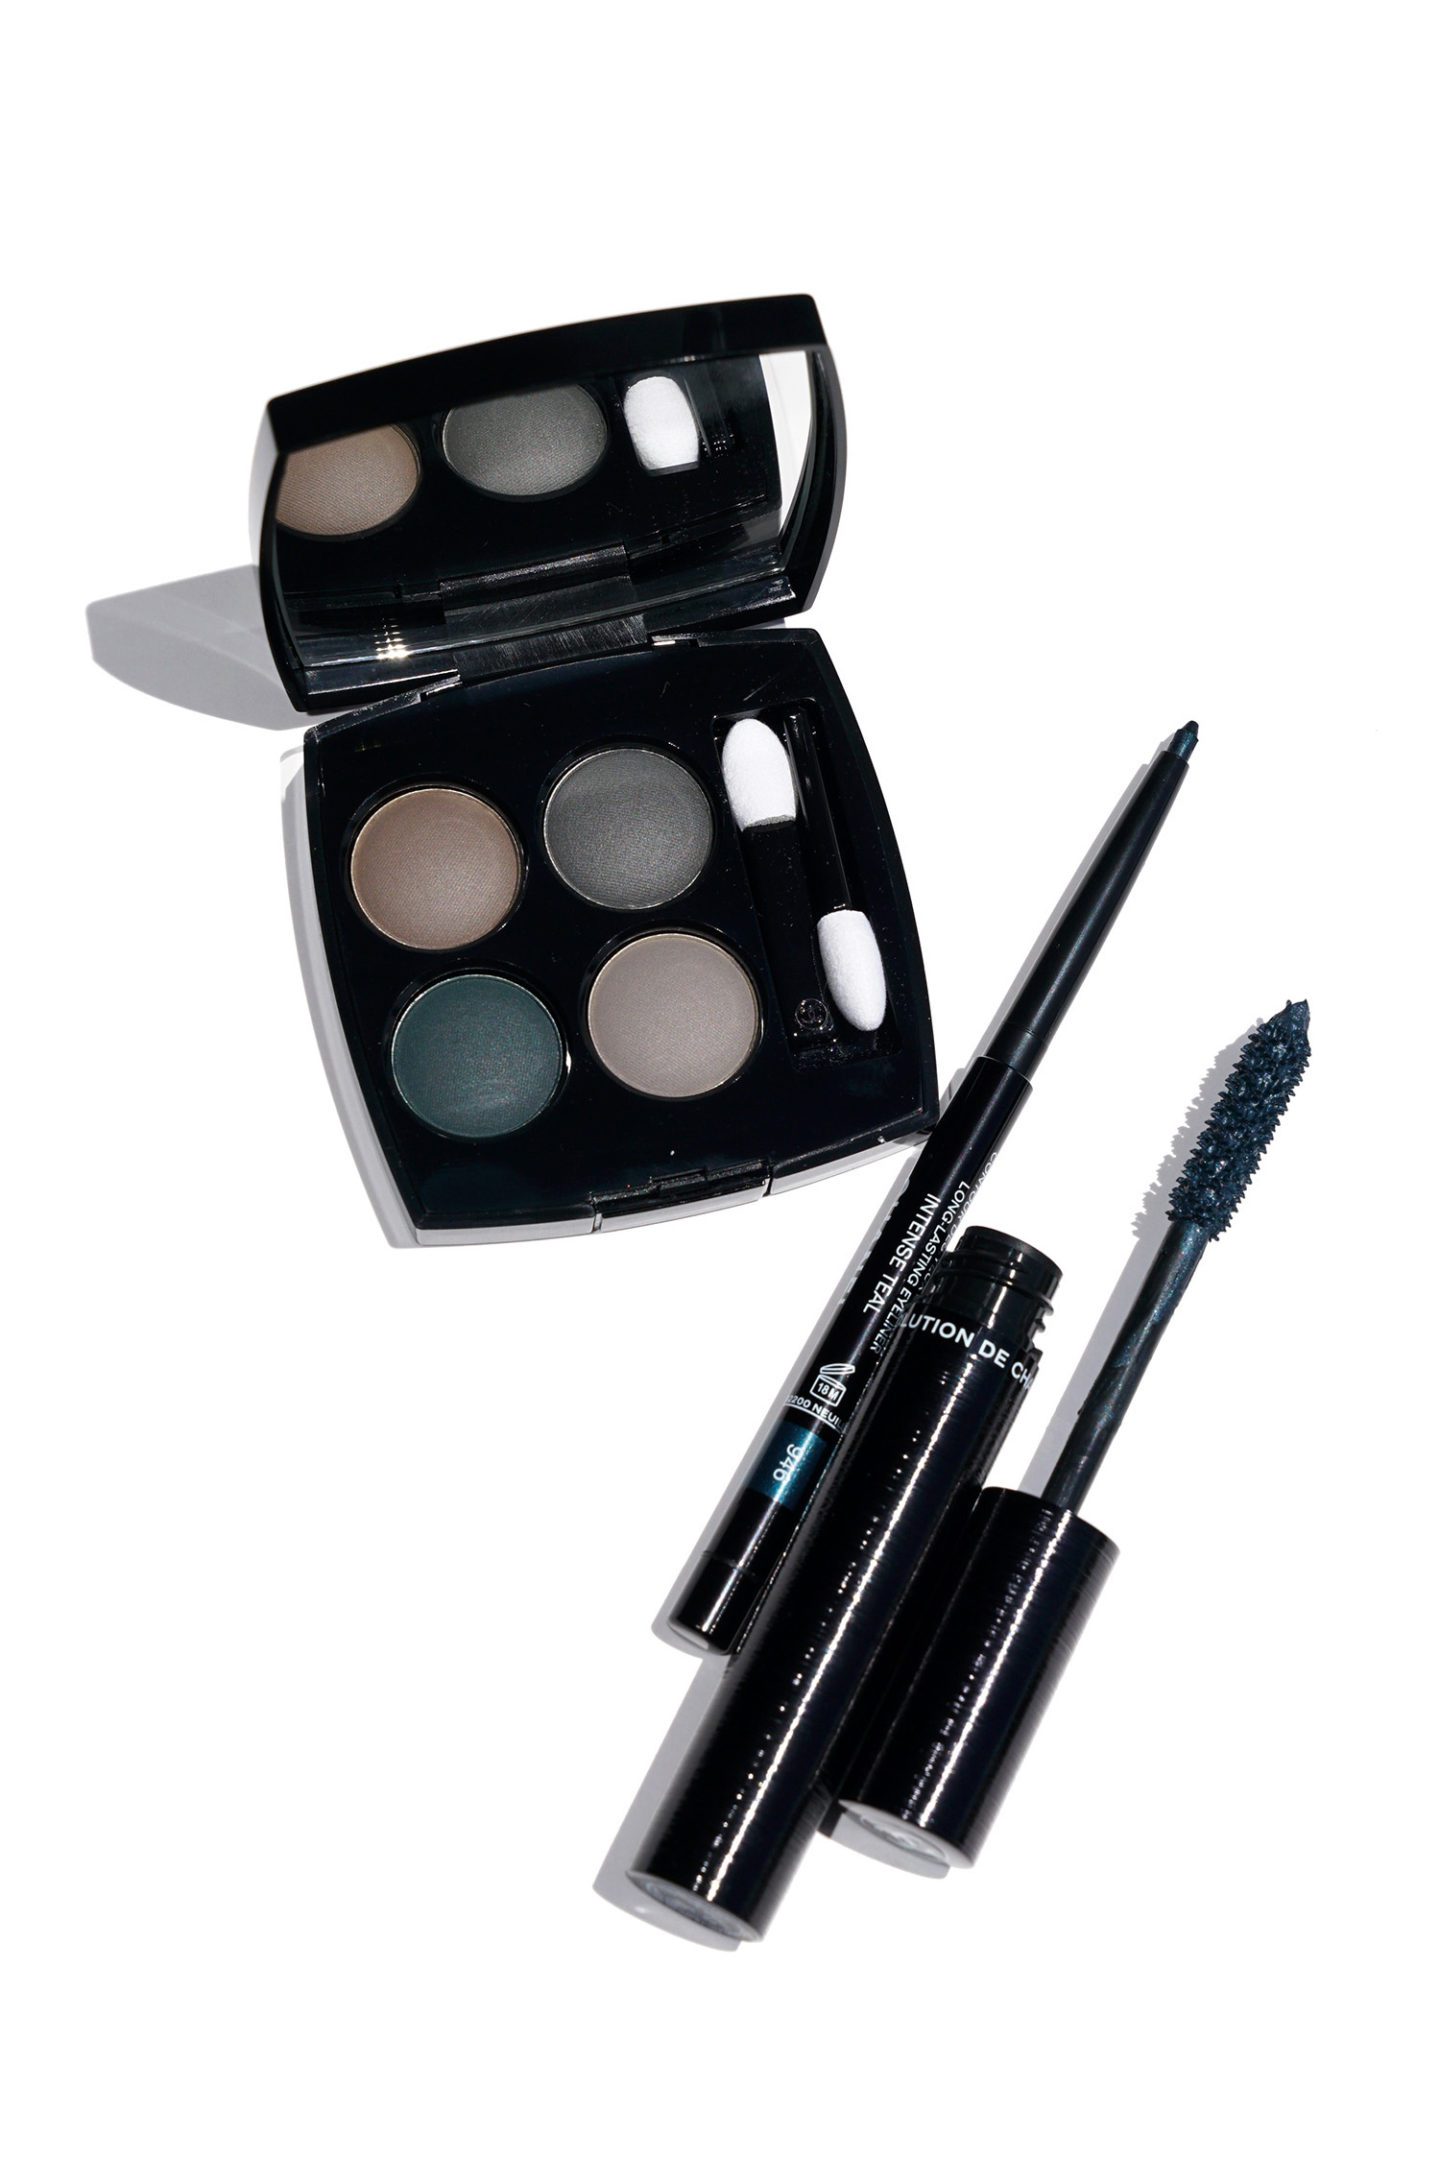 Chanel Blurry Blue, Intense Teal Review and Swatches